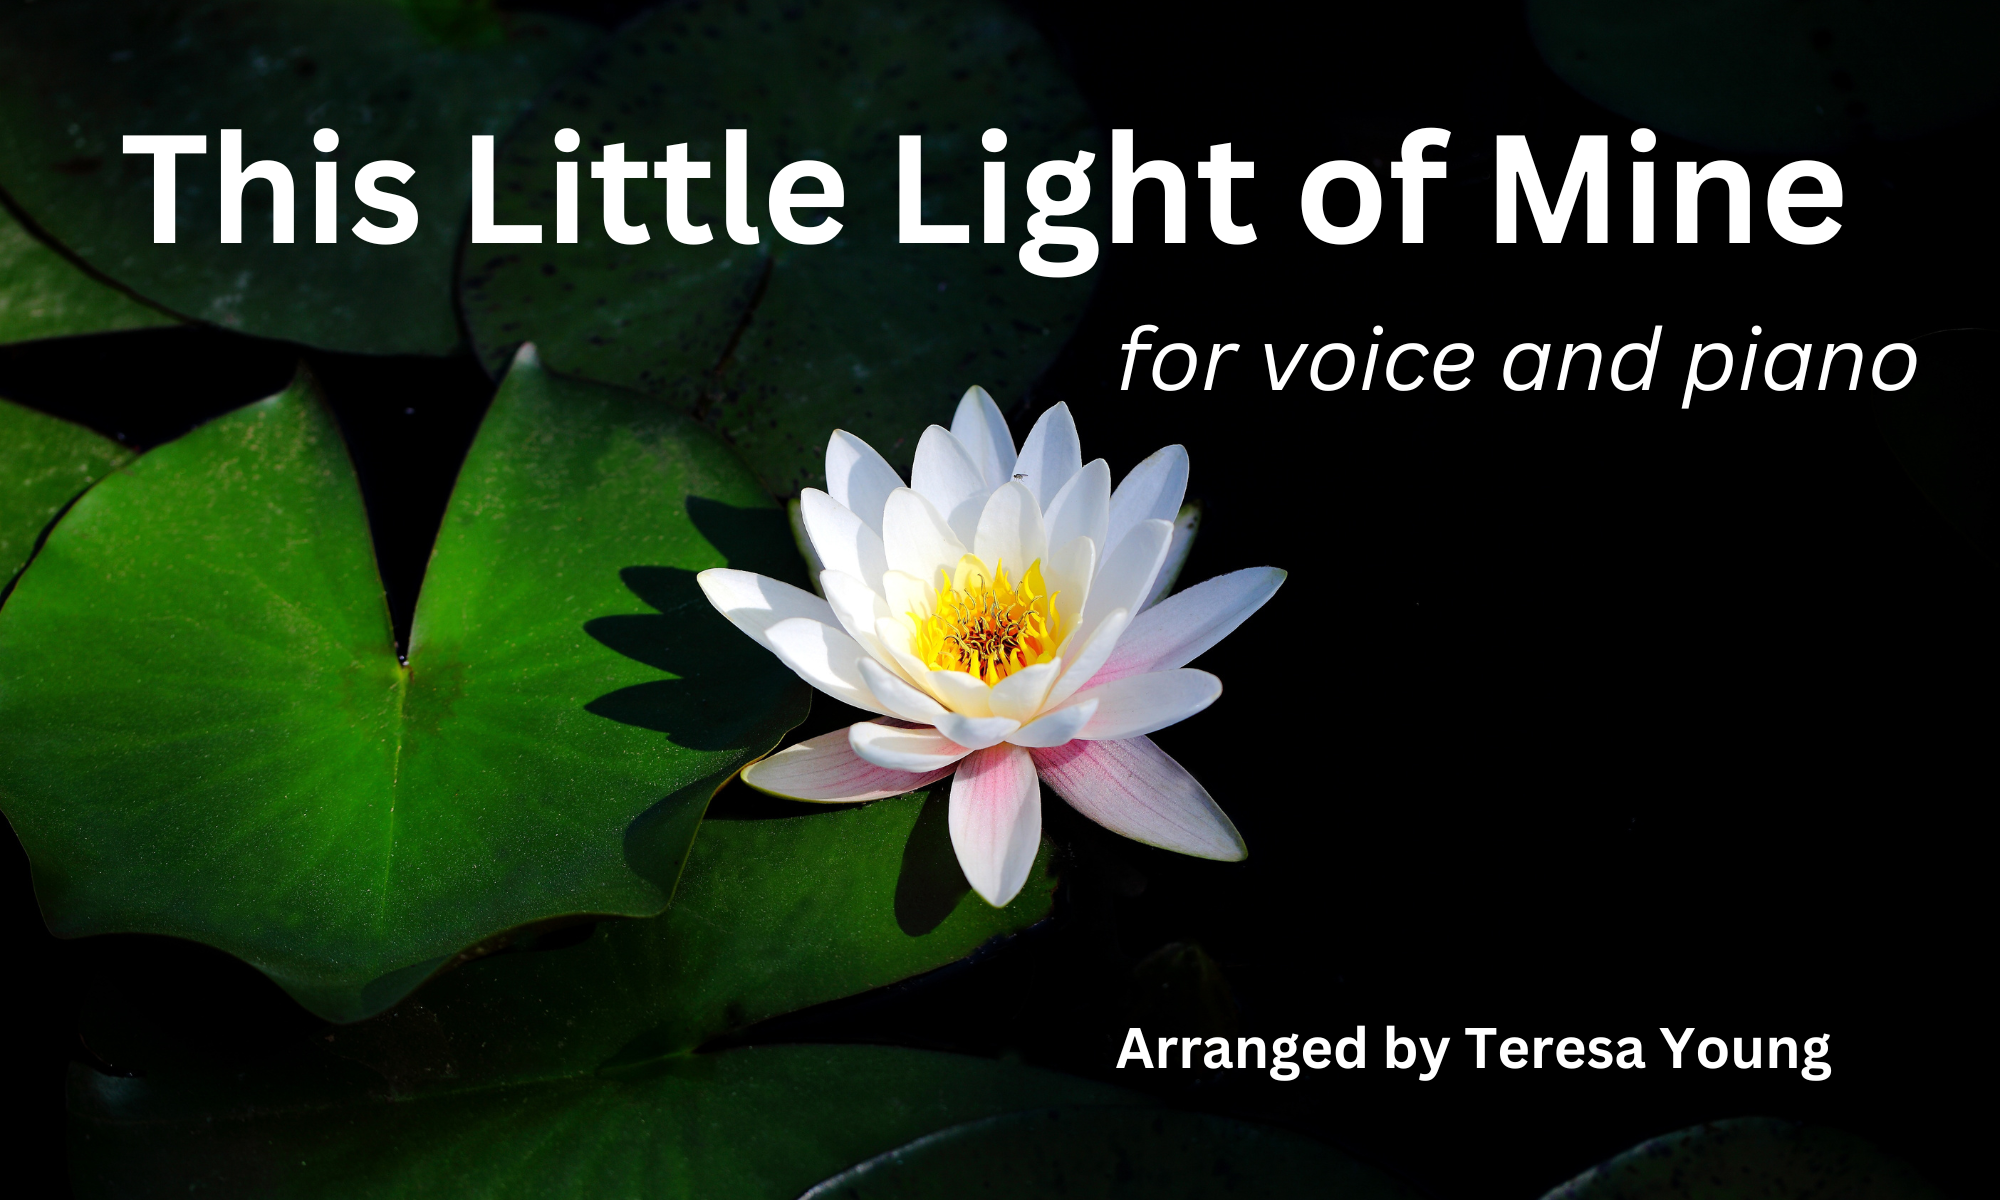 This Little Light of Mine, arr. Teresa Young